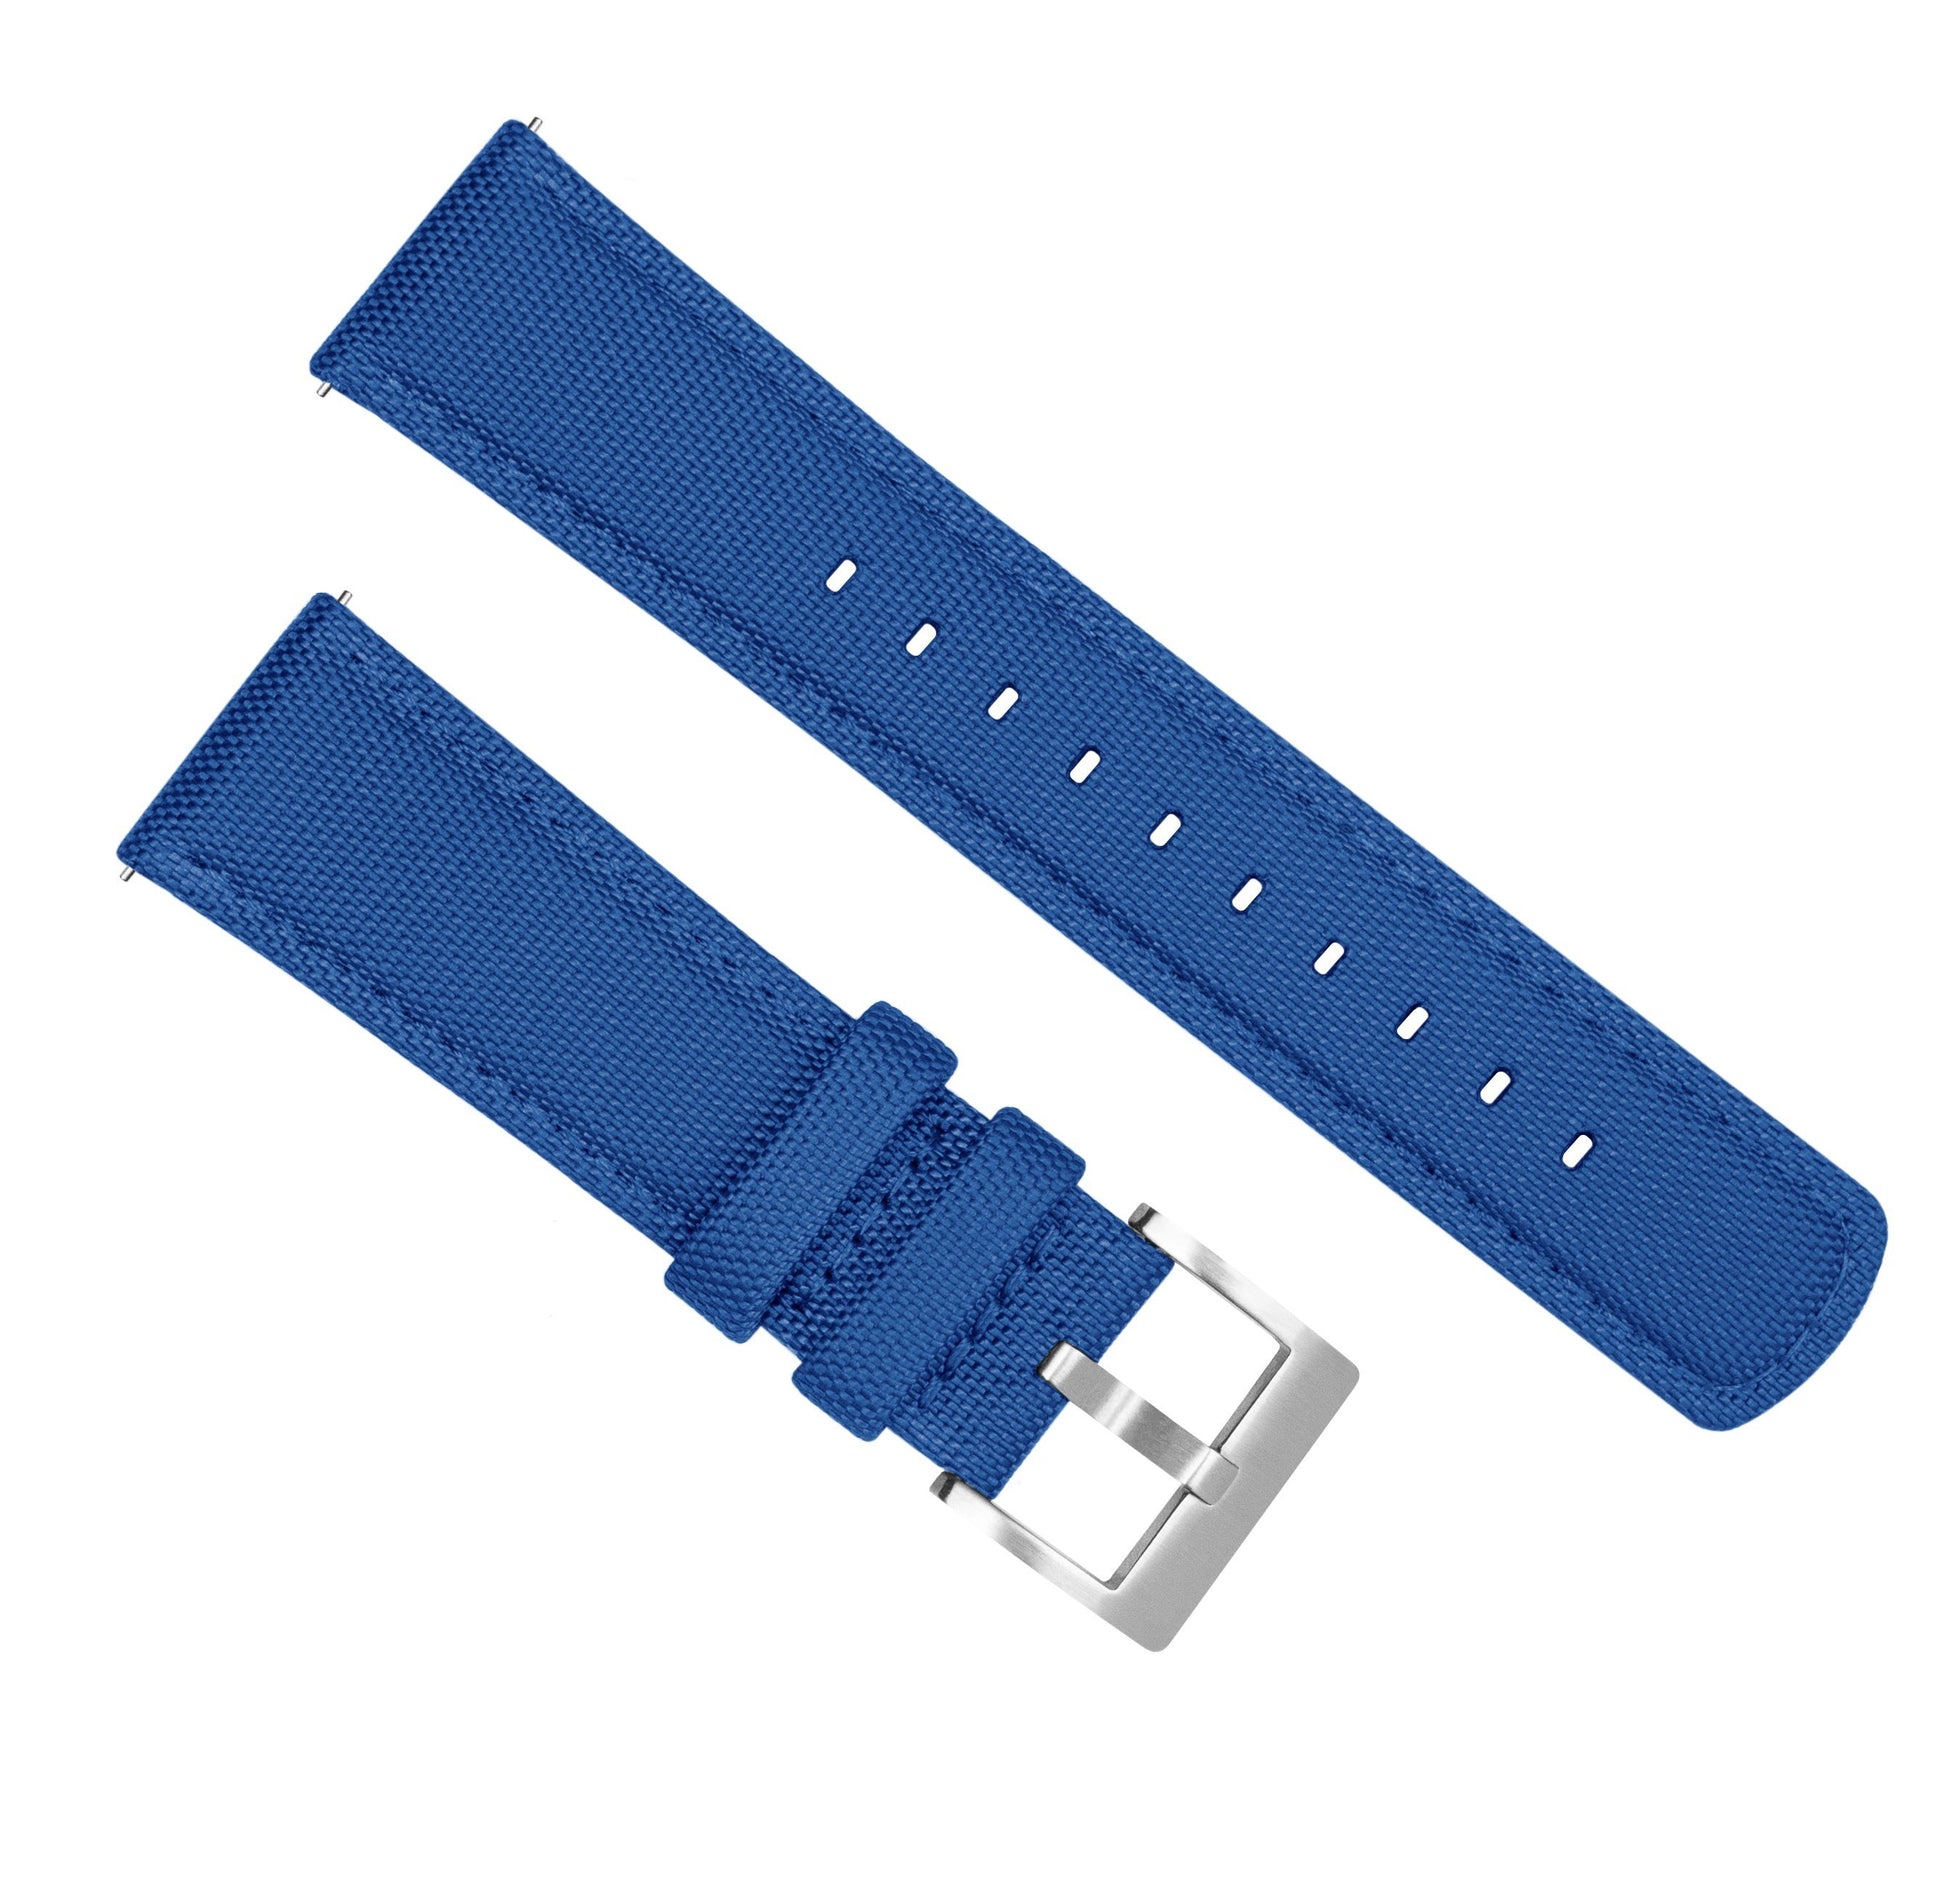 Withings Nokia Activité and Steel HR | Sailcloth Quick Release | Royal Blue - Barton Watch Bands